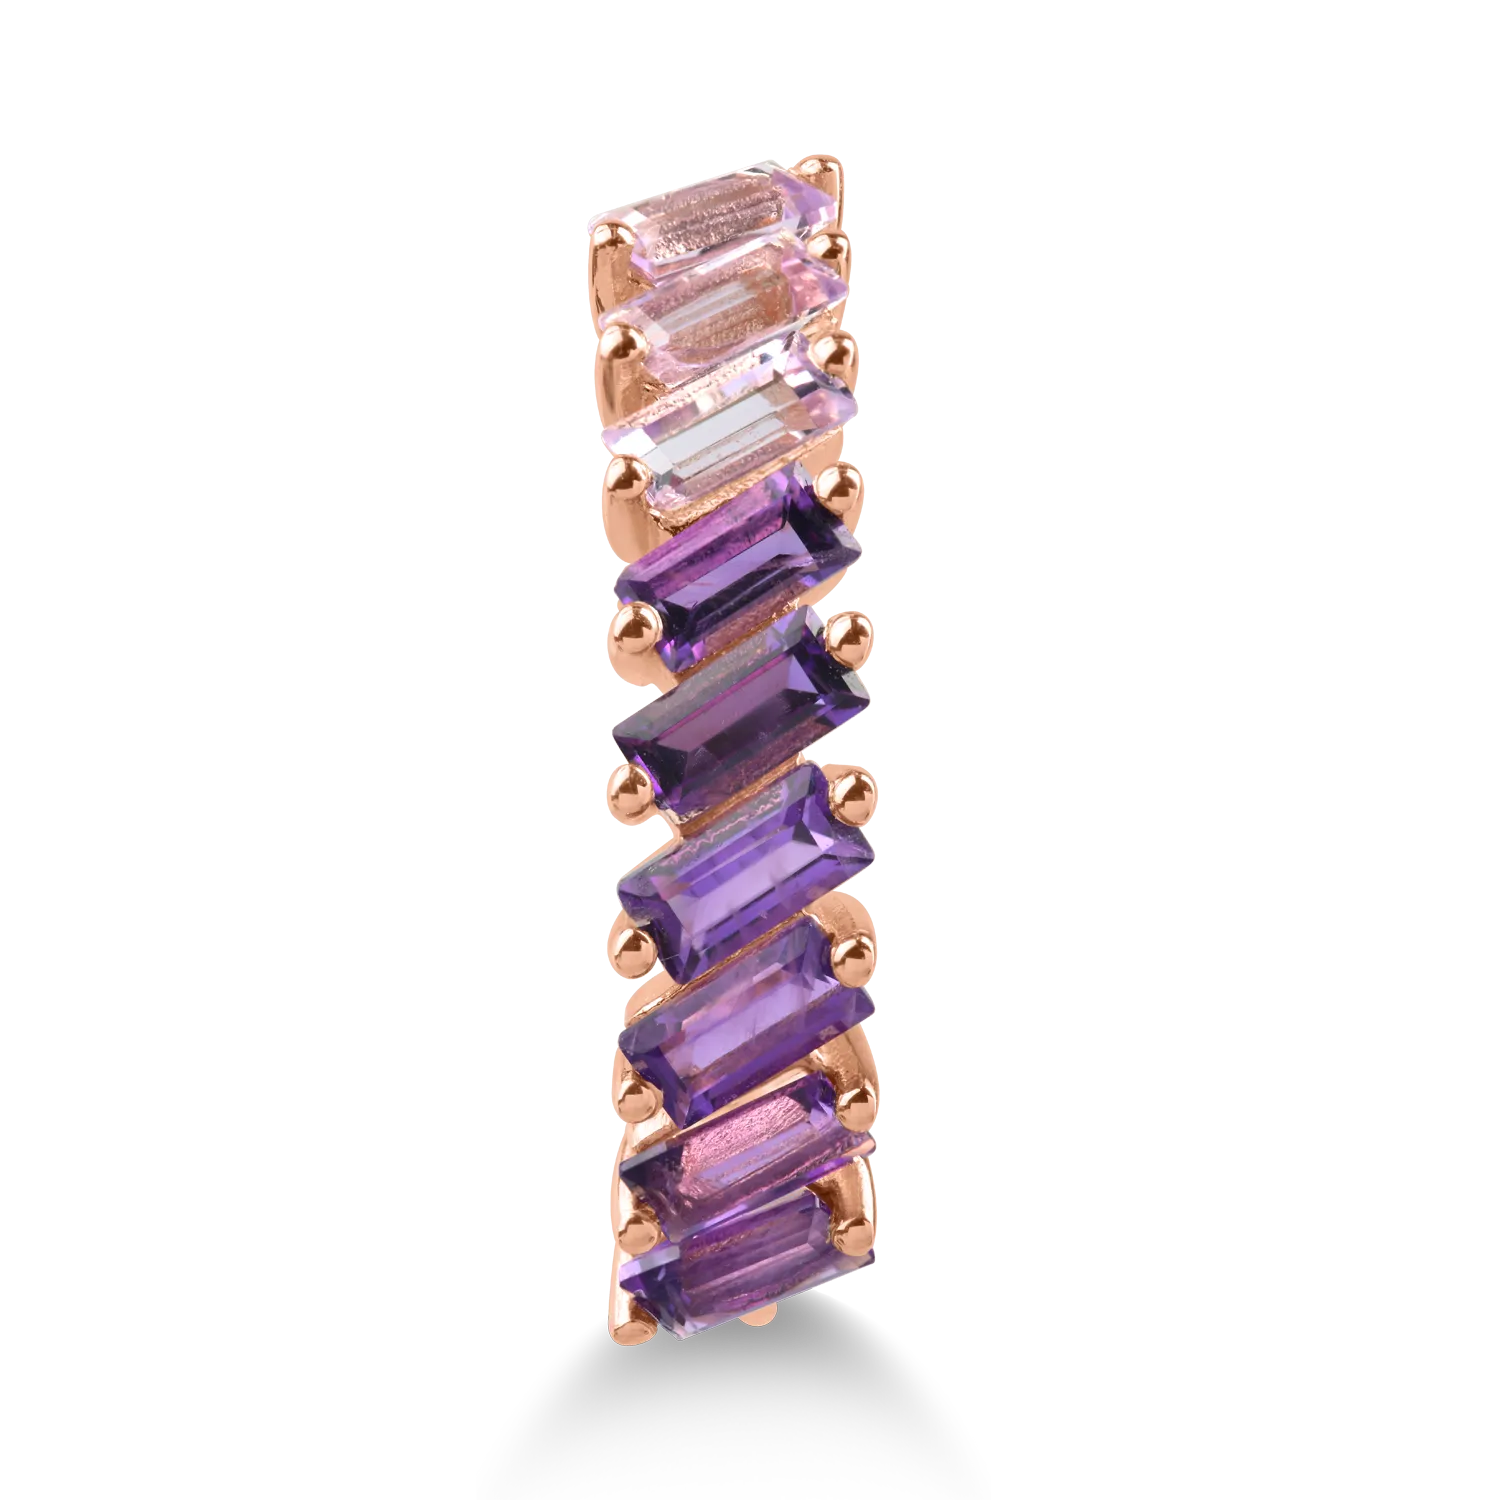 Rose gold ring with 0.943ct amethysts